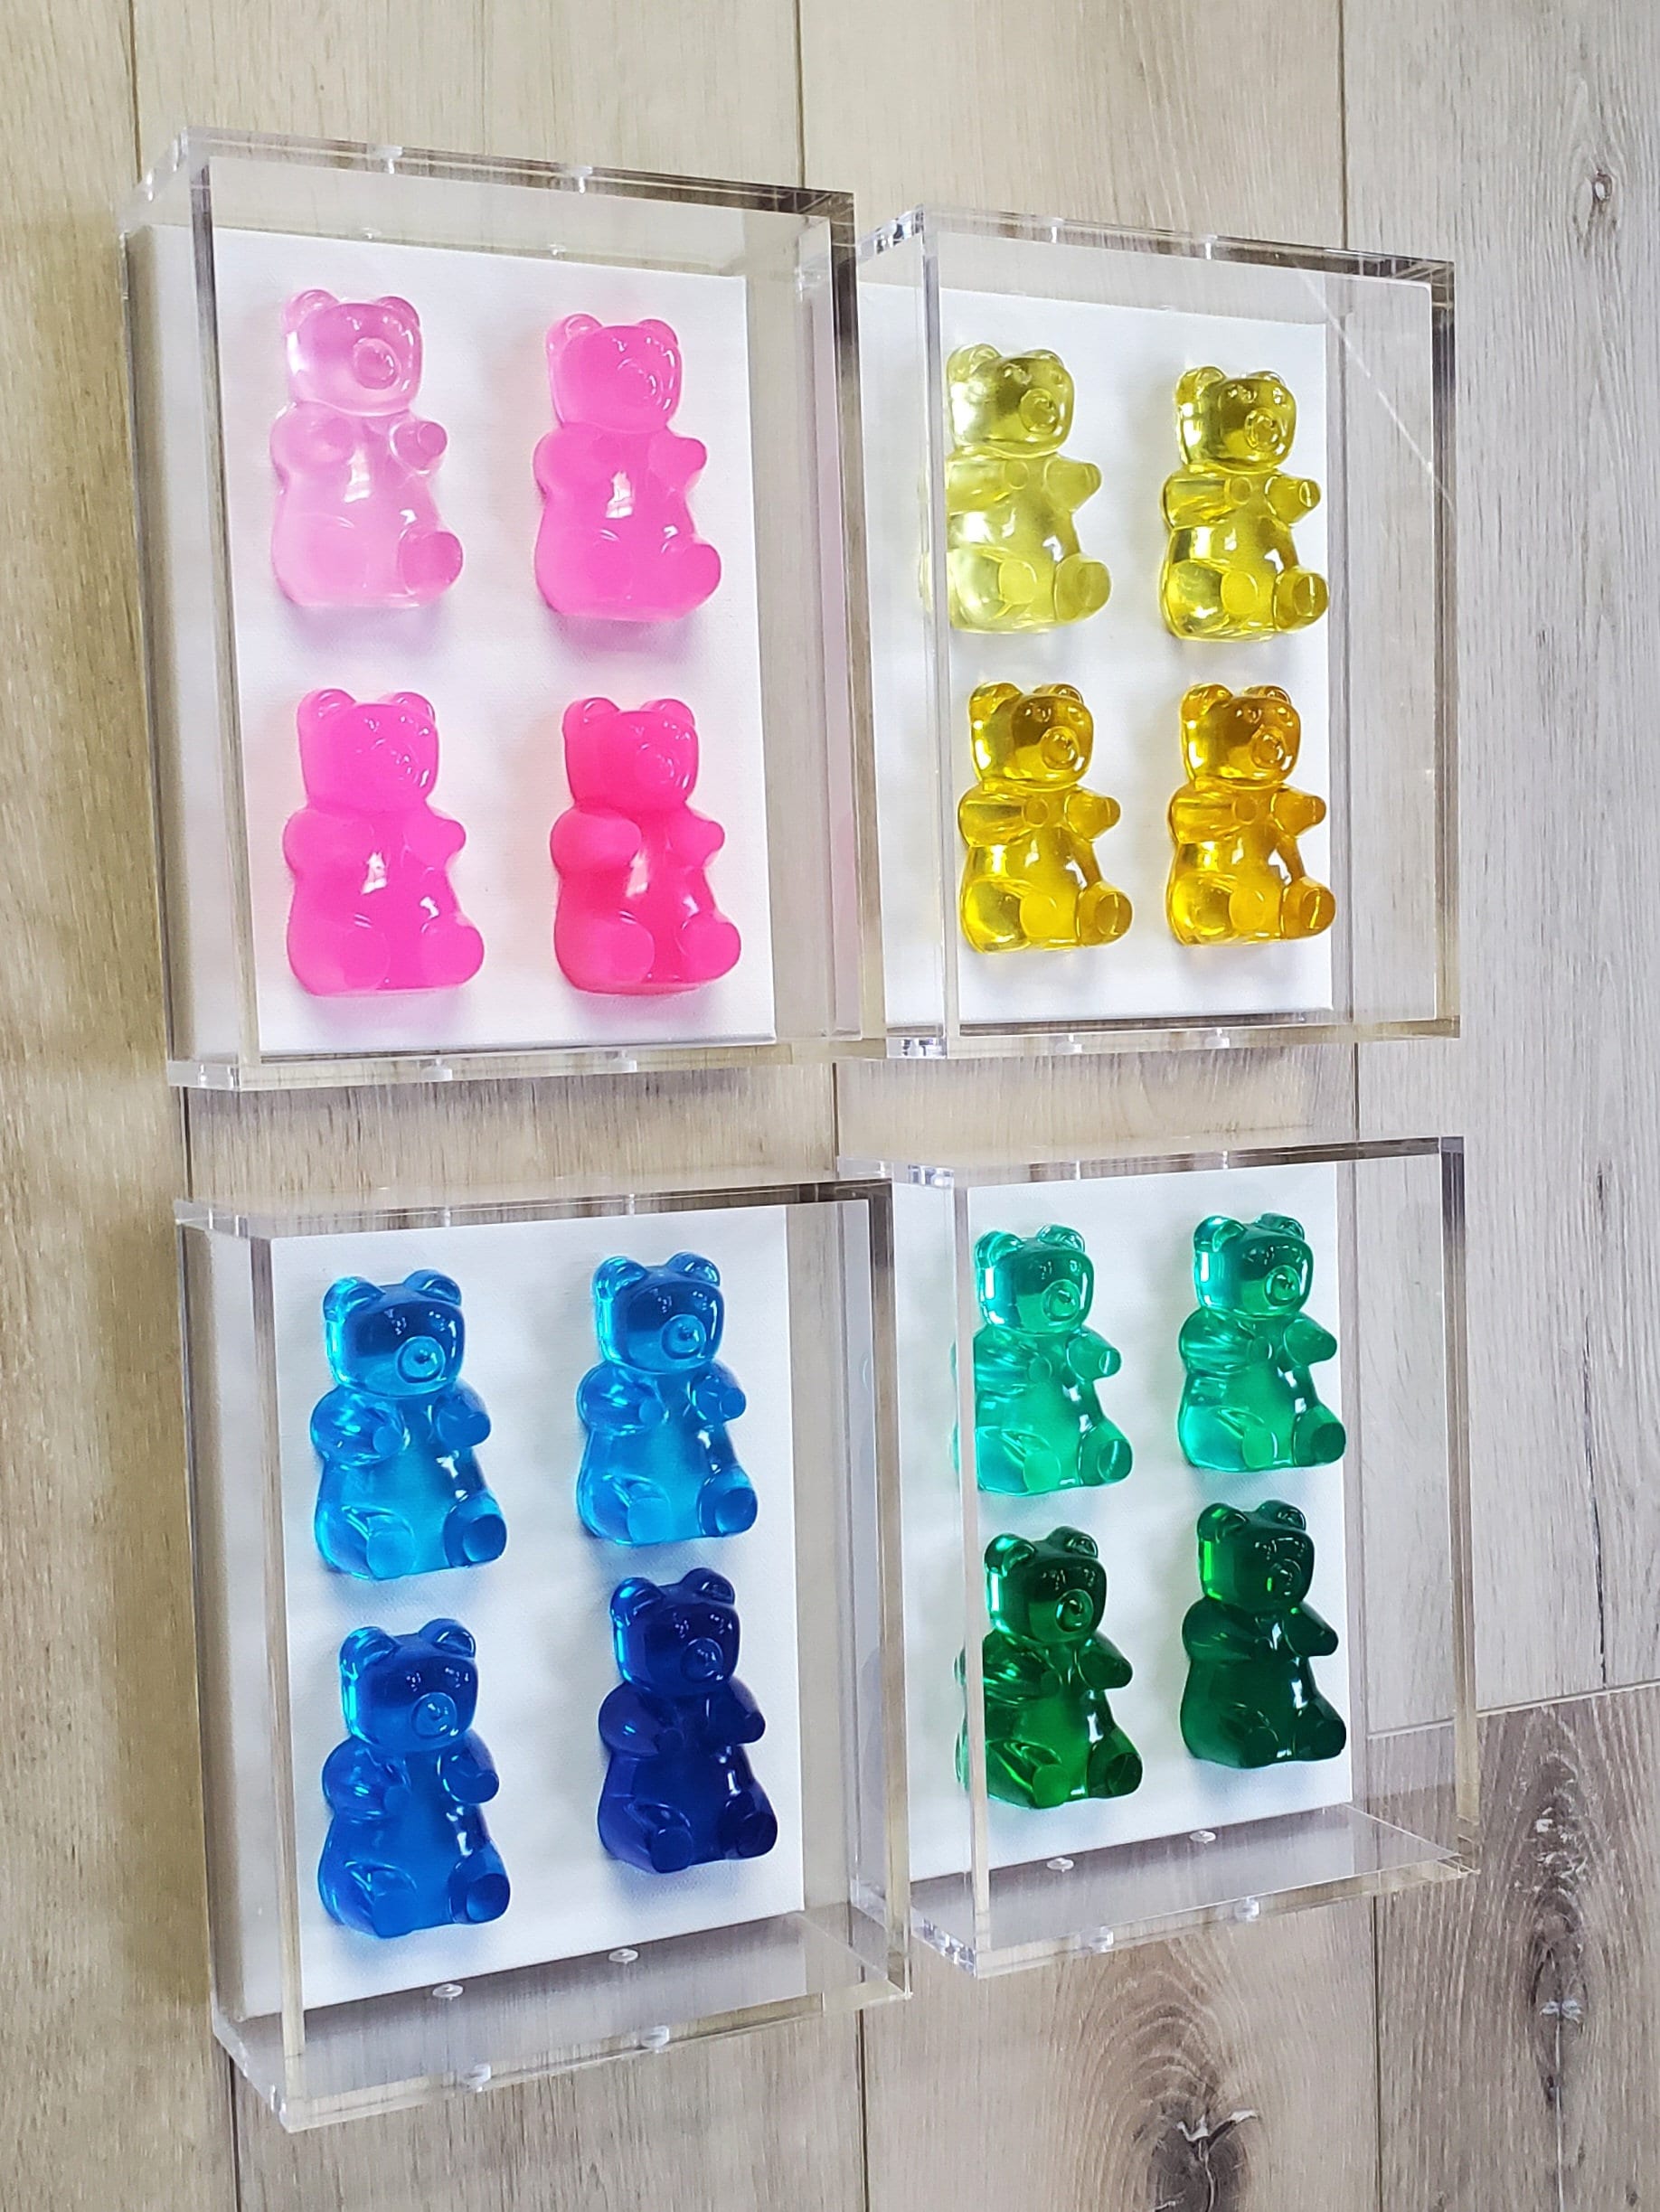 Pop Art, Visual 3D Art, Set of 9 Boxes,Customize Luxury Sculpture Wall Art, Popsicle, Bears, Donuts.